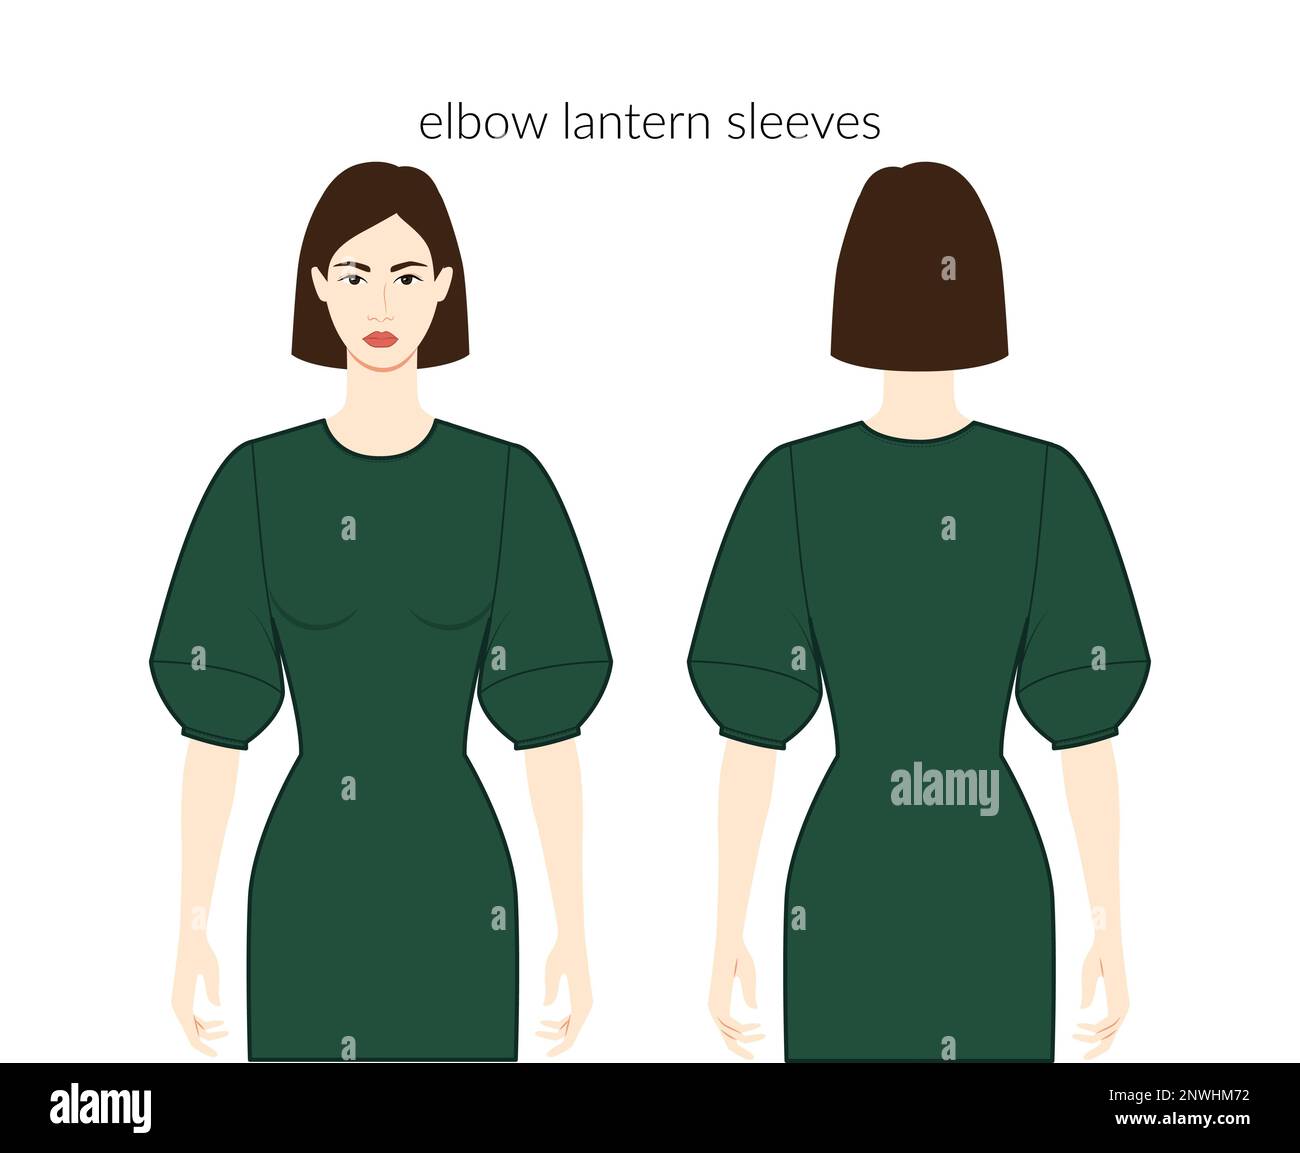 Lantern sleeves clothes character beautiful lady in emerald top, shirt ...